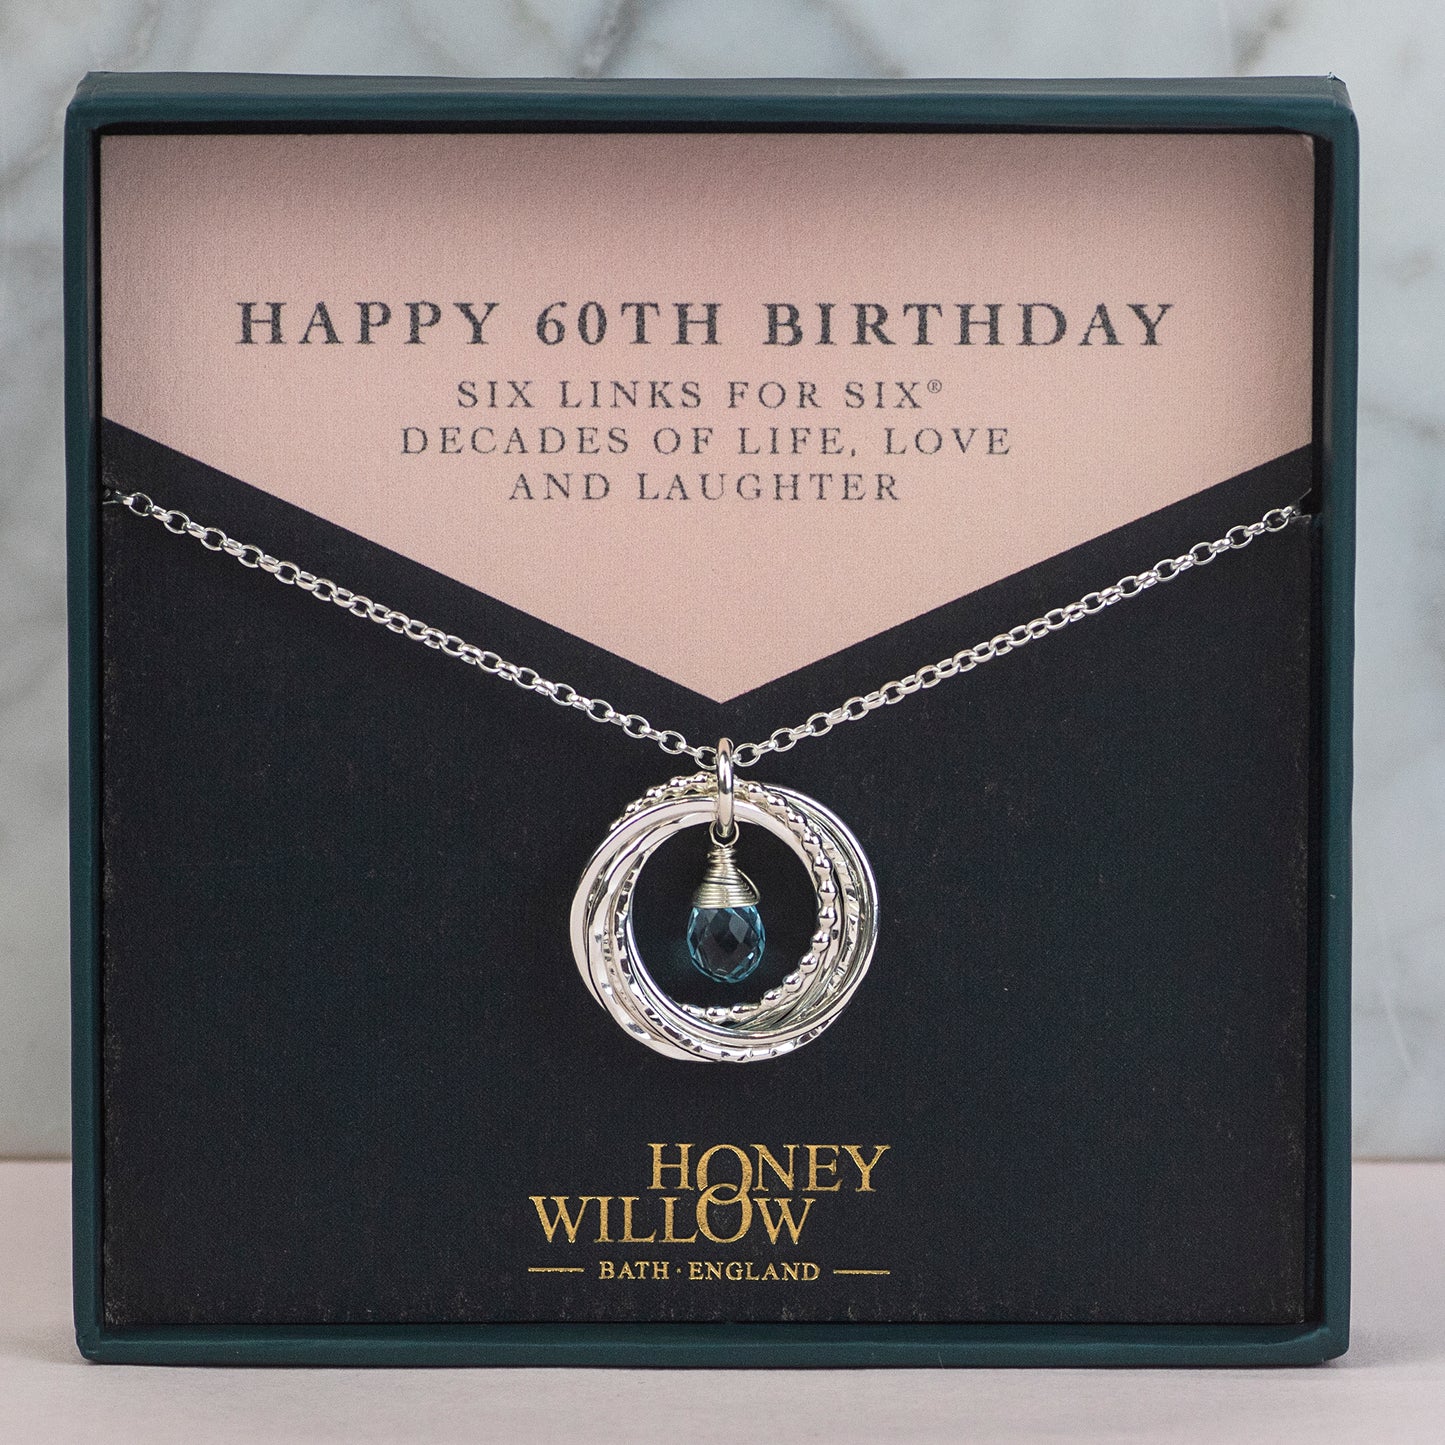 60th Birthday Birthstone Necklace - The Original 6 Links for 6 Decades Necklace - Silver